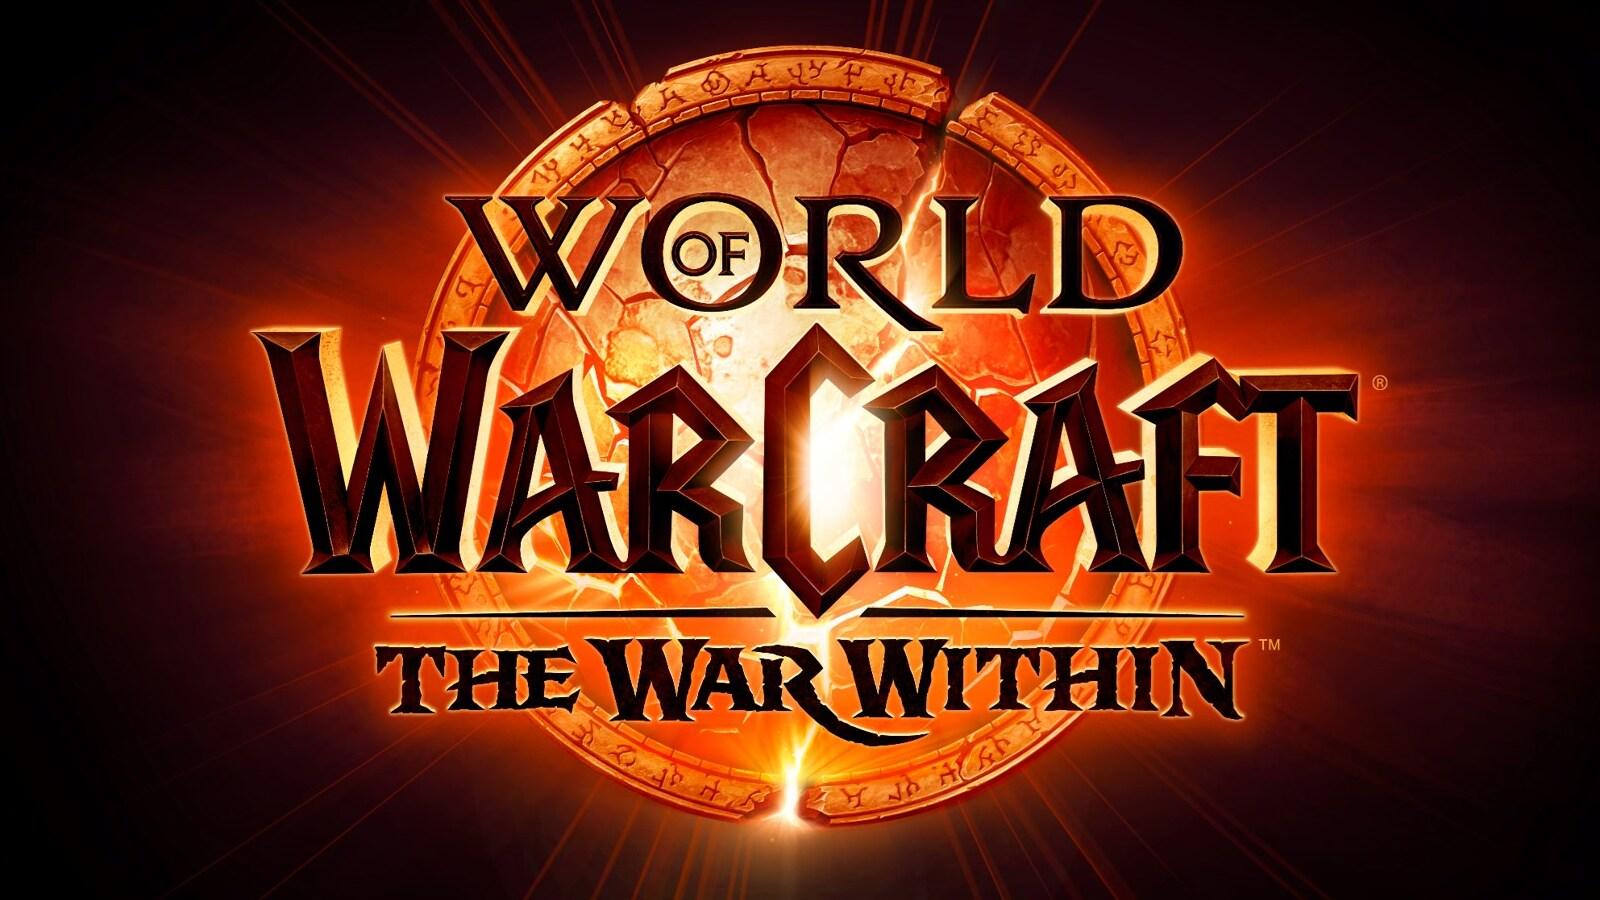 The confirmed logo for World of Warcraft: The War Within